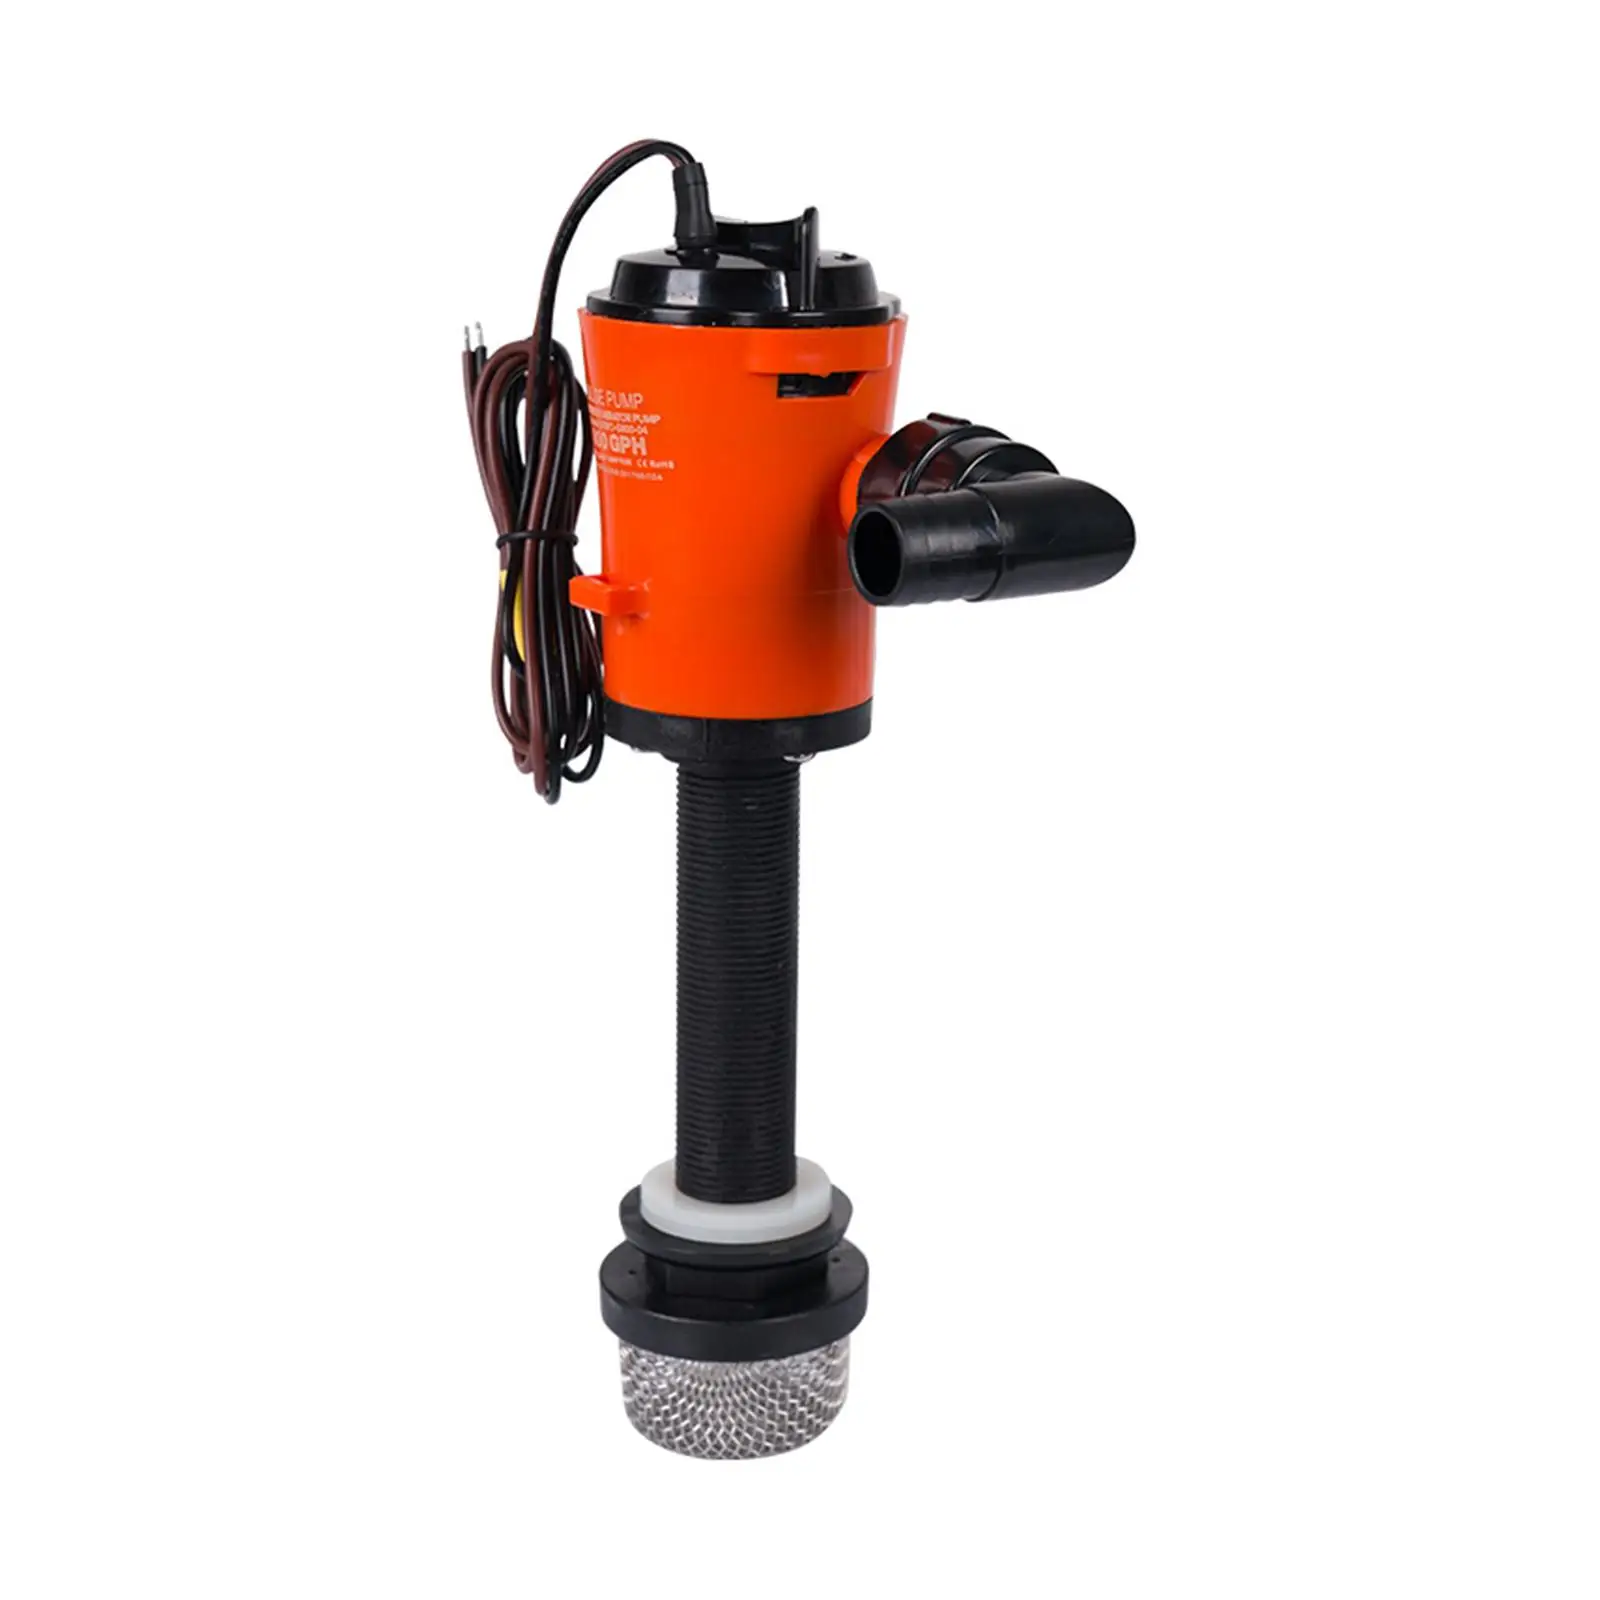 Aerator Livewell Pump Removable Durable Easy to Install Boat Tools Spare Parts Replaces Submersible Accessories Boat Bilge Pump